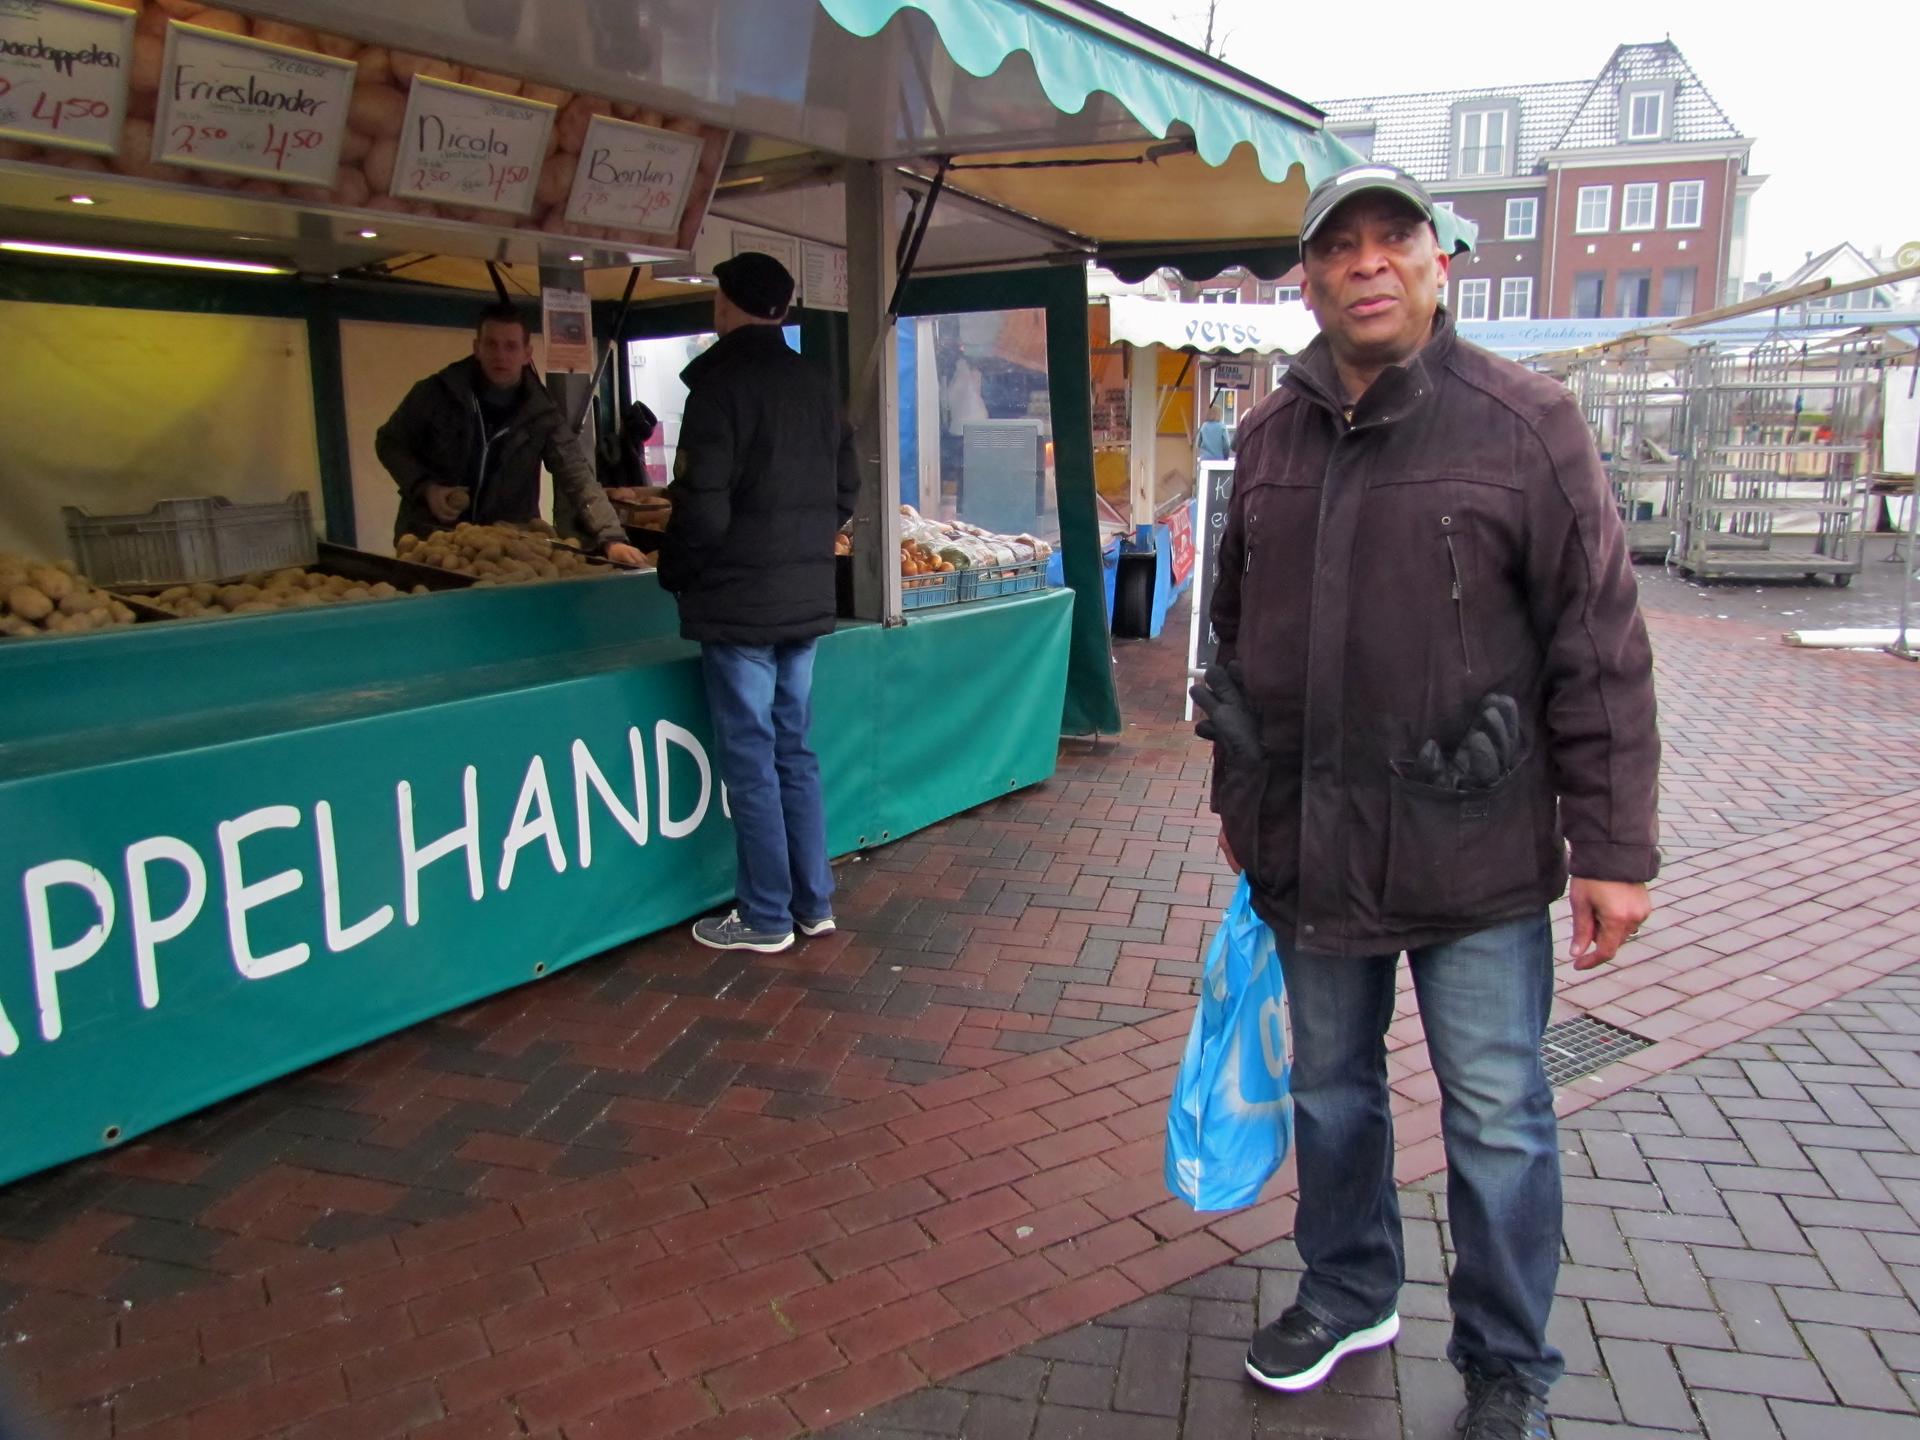 Leonard, a Surinamese immigrant who's lived in the Netherlands for decades, plans to vote for Geert Wilders. 